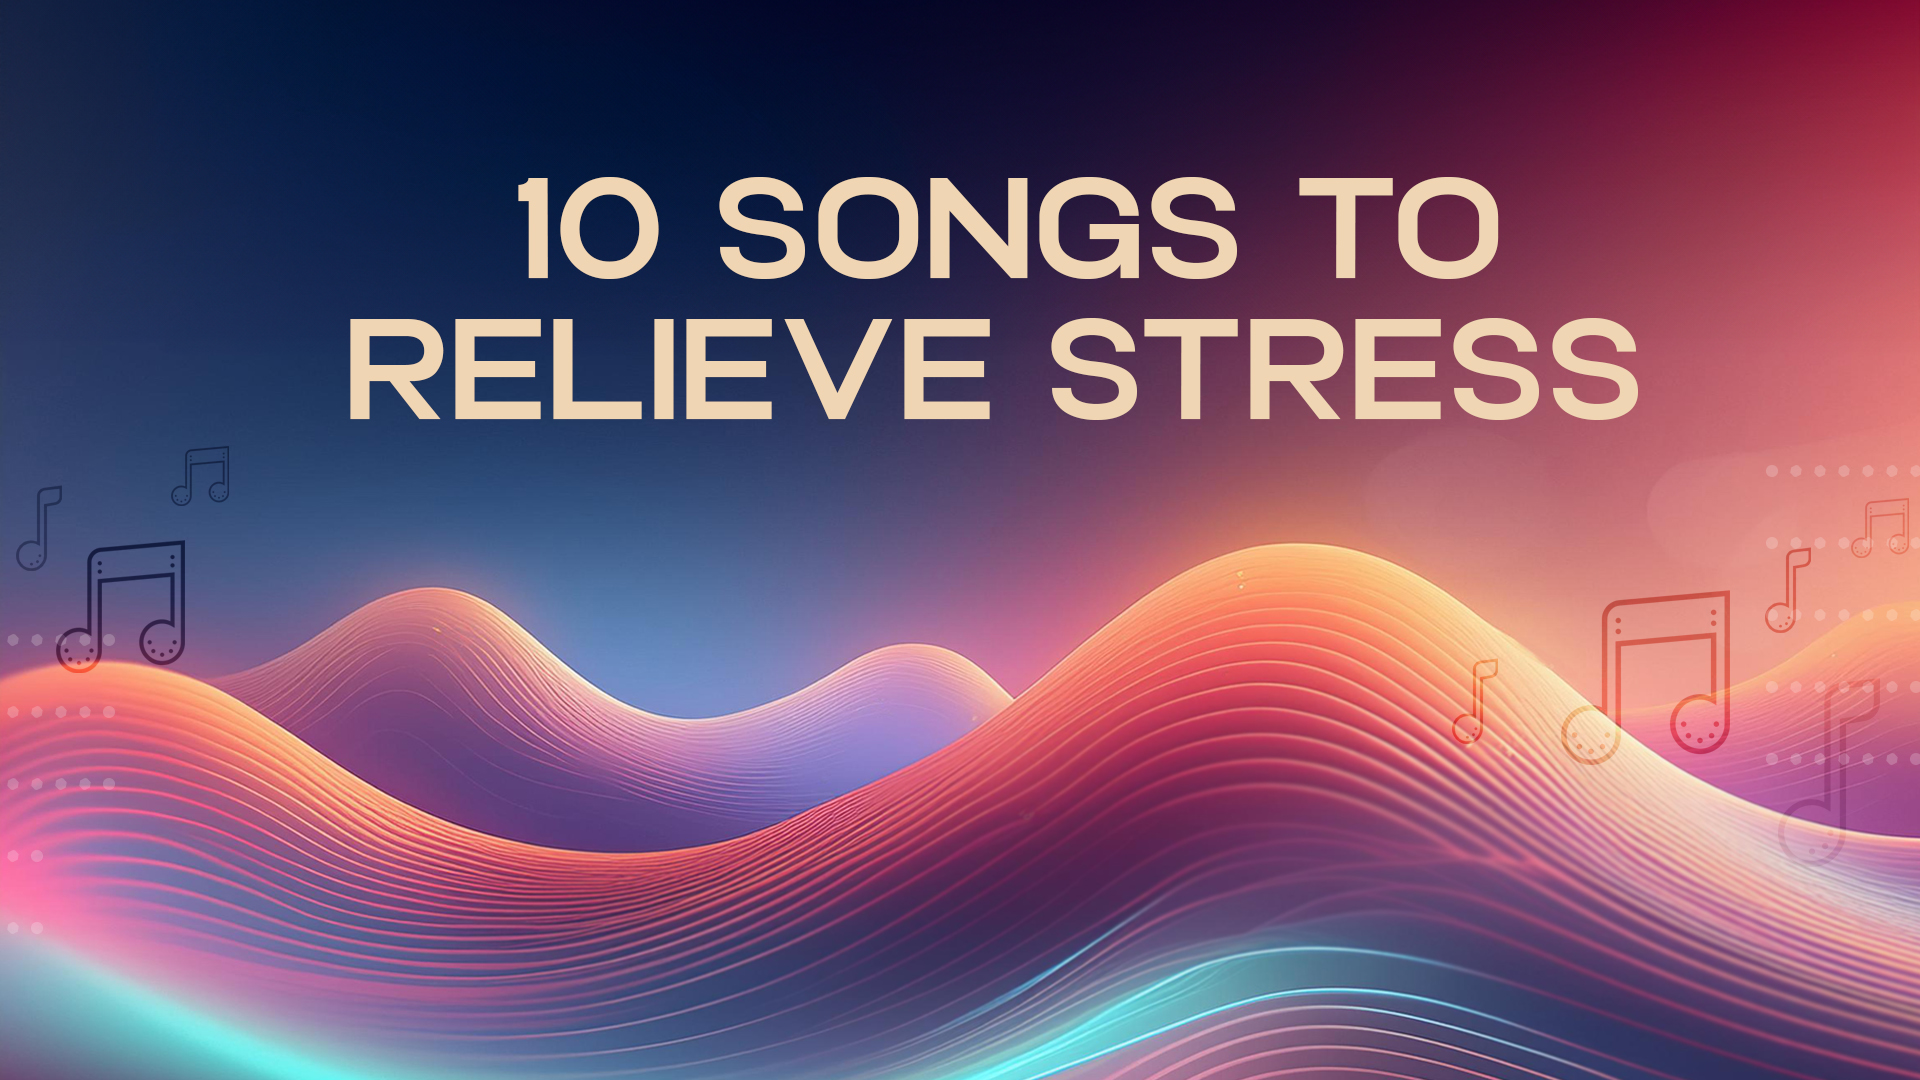 10 songs to relieve stress